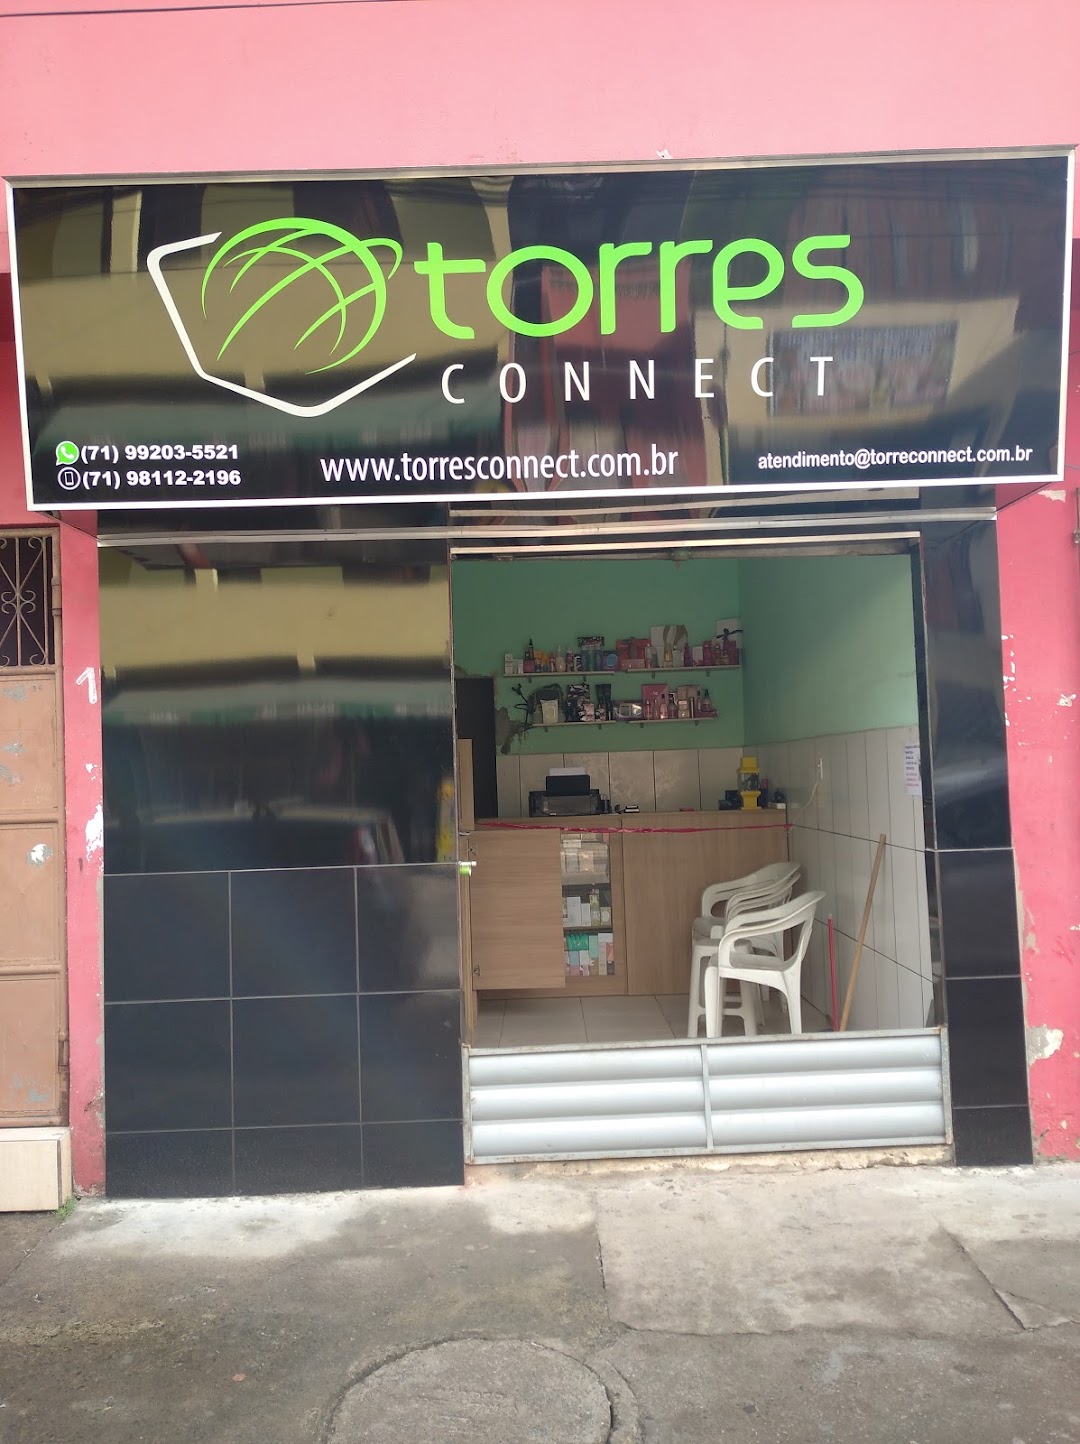 Torres Connect